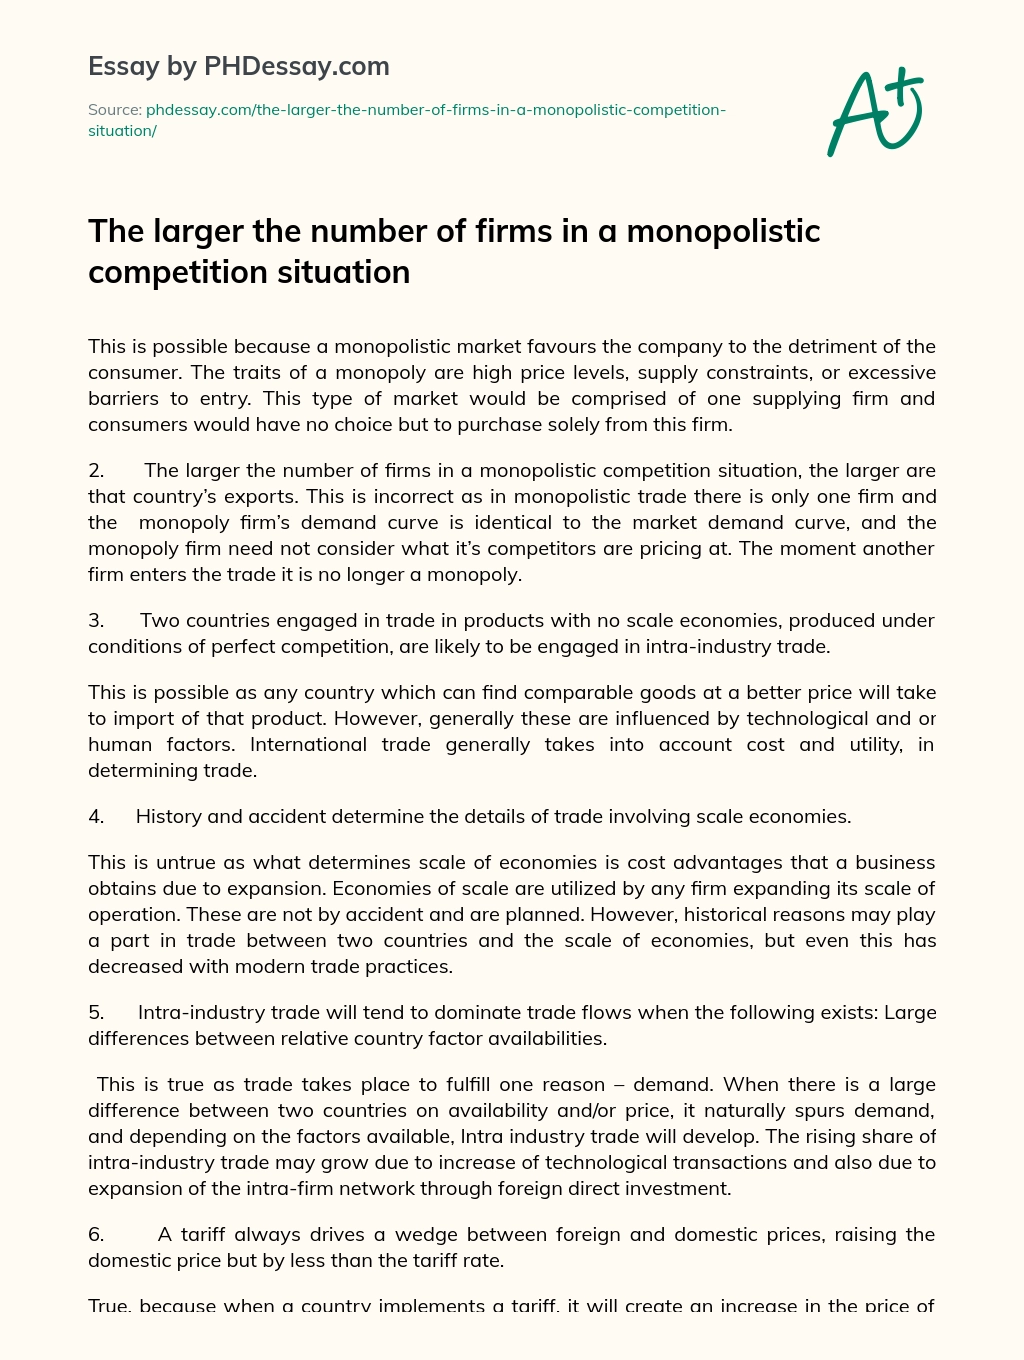 The larger the number of firms in a monopolistic competition situation essay